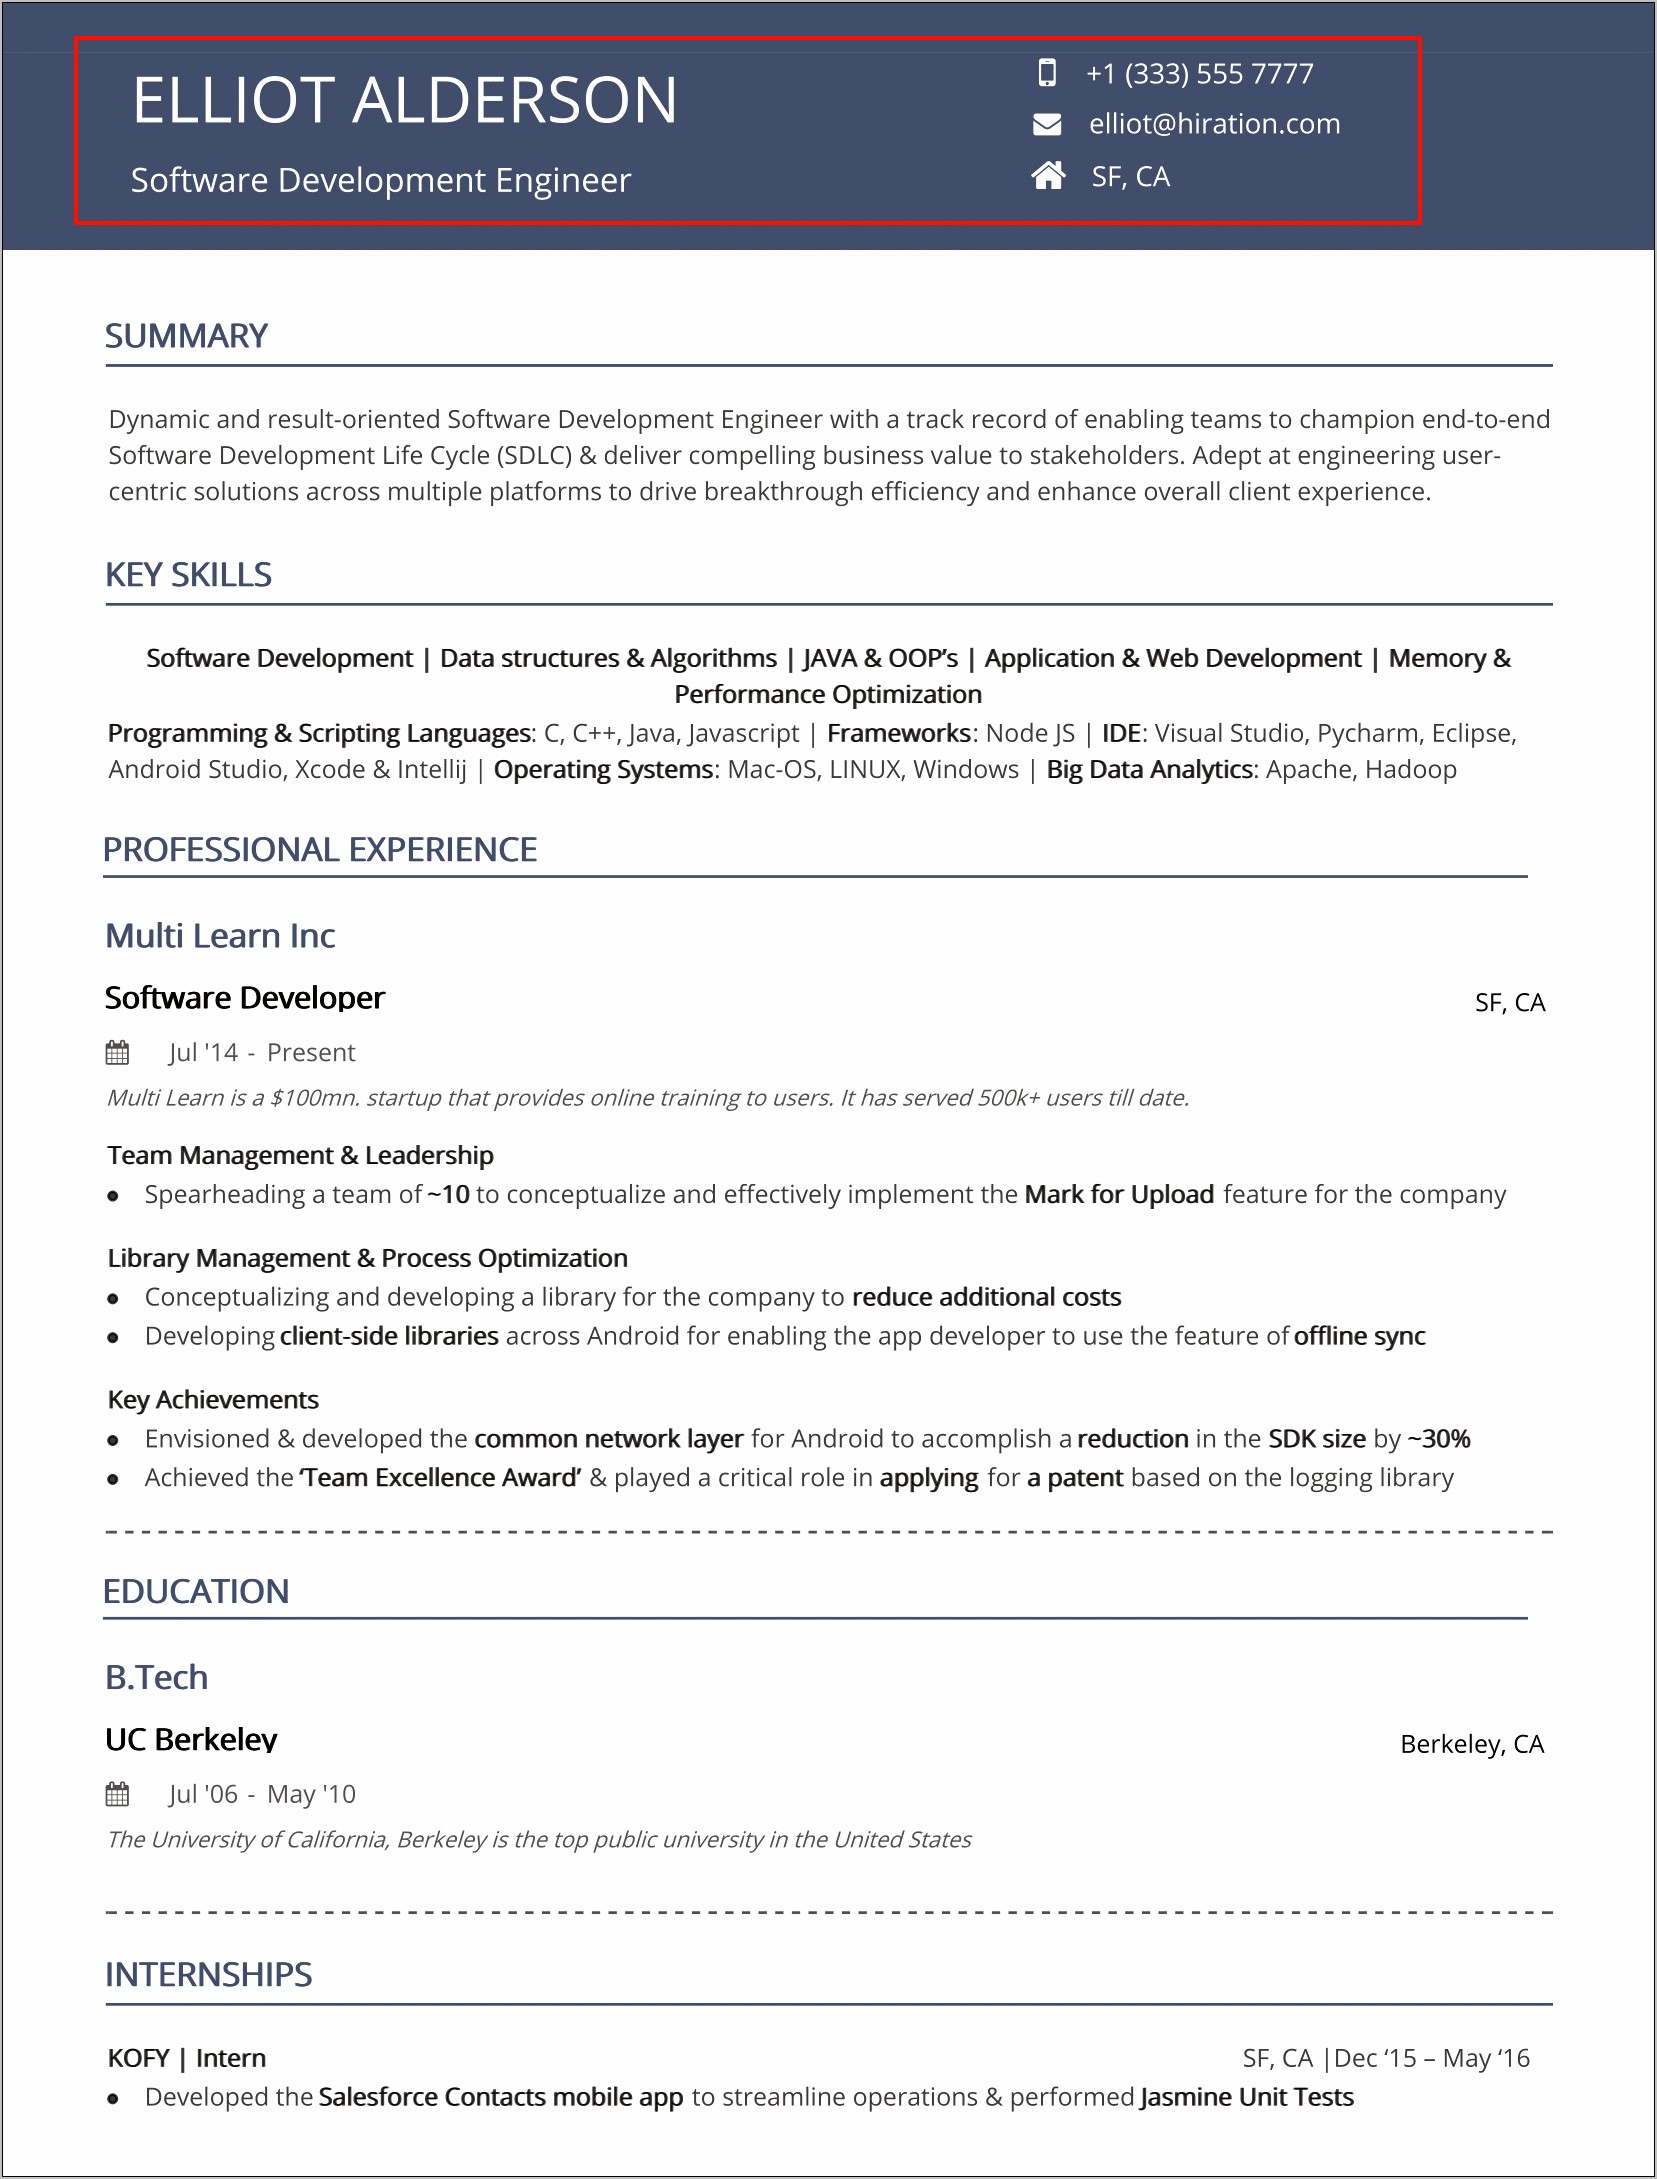 Name Your Resume To Stand Out Examples